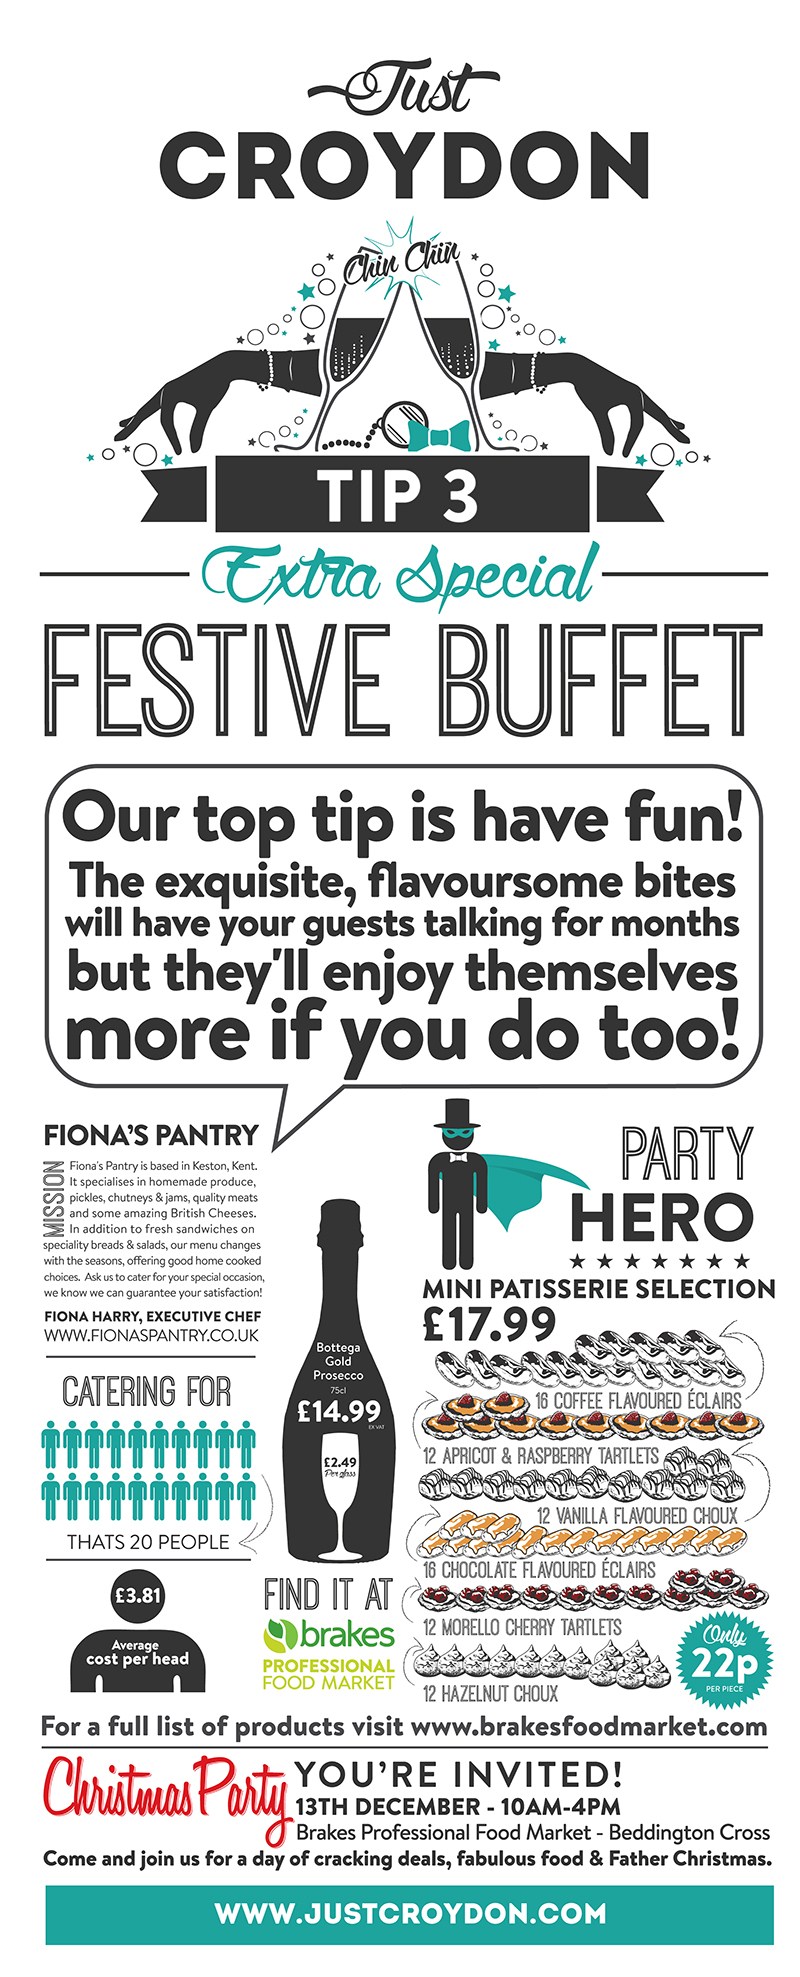 Party Tip 3: Extra Special Festive Buffet